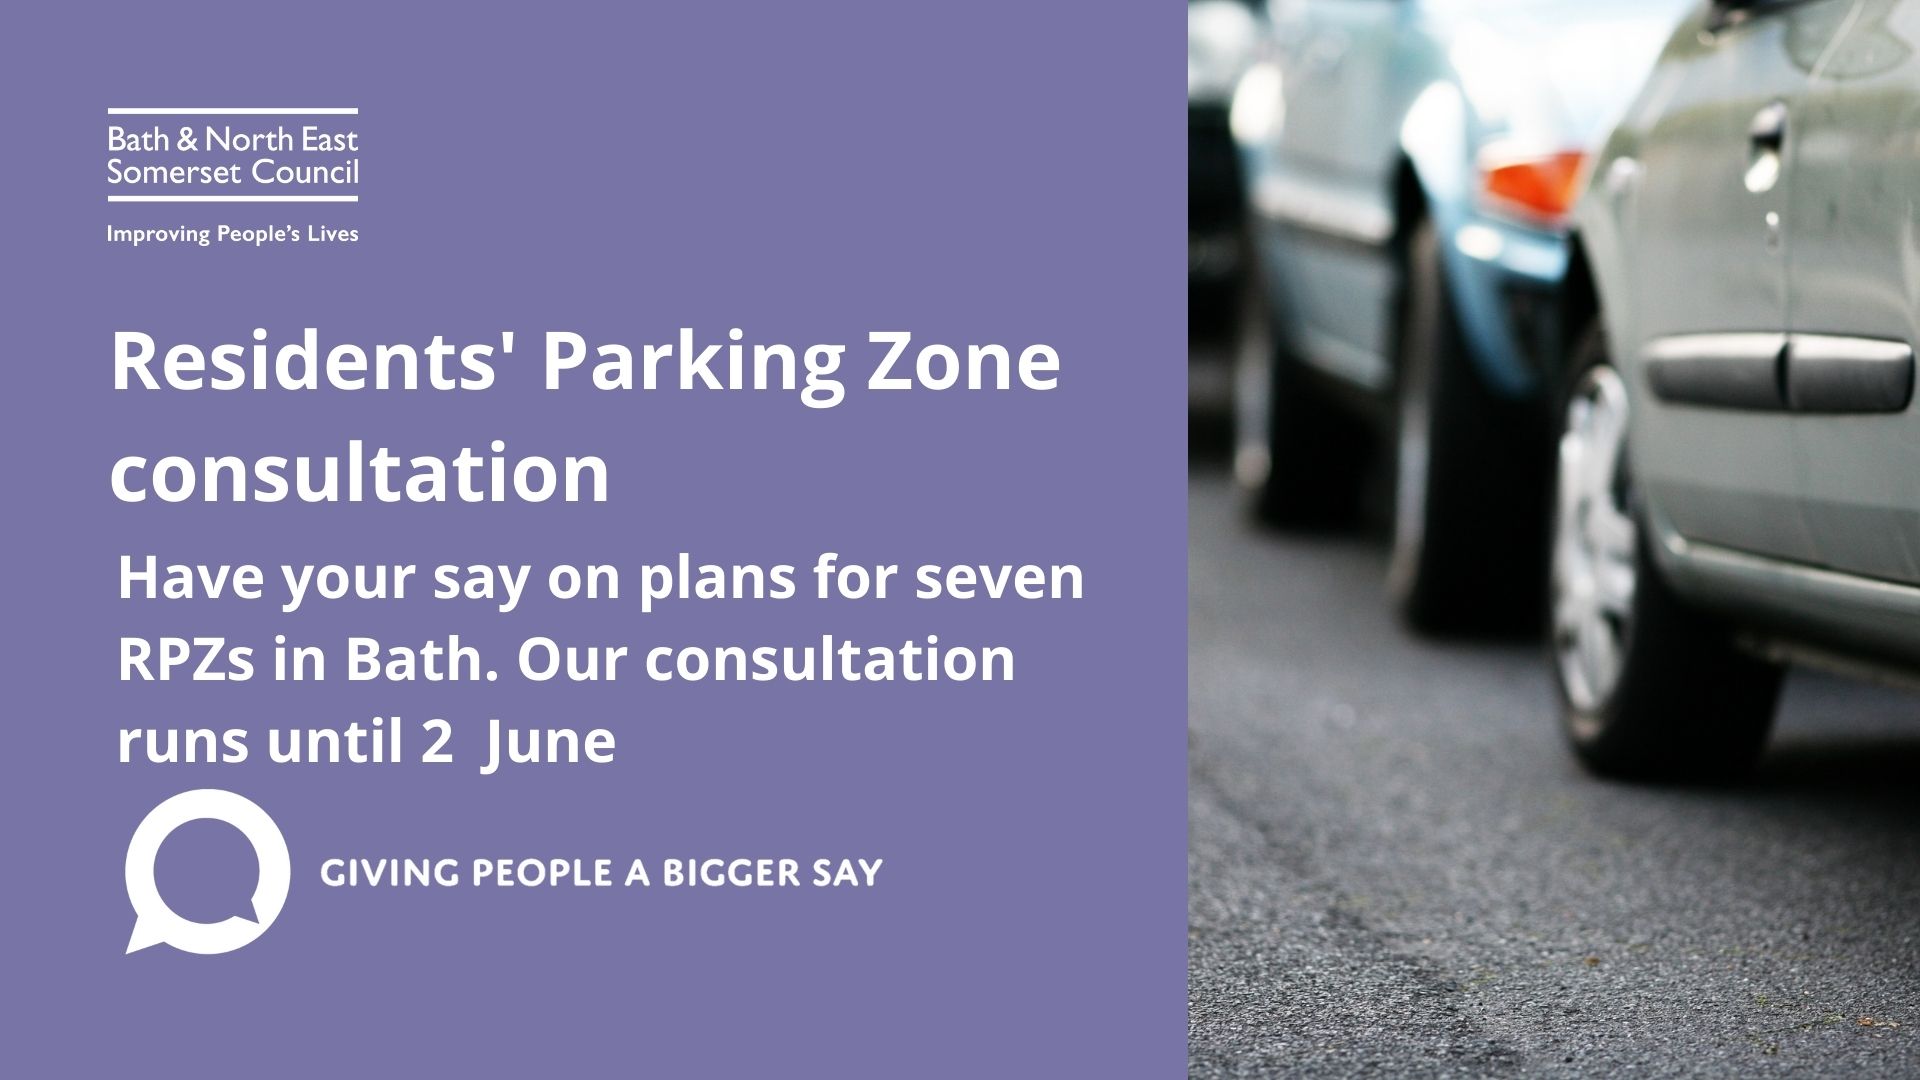 Residents’ Parking Zones consultation launched